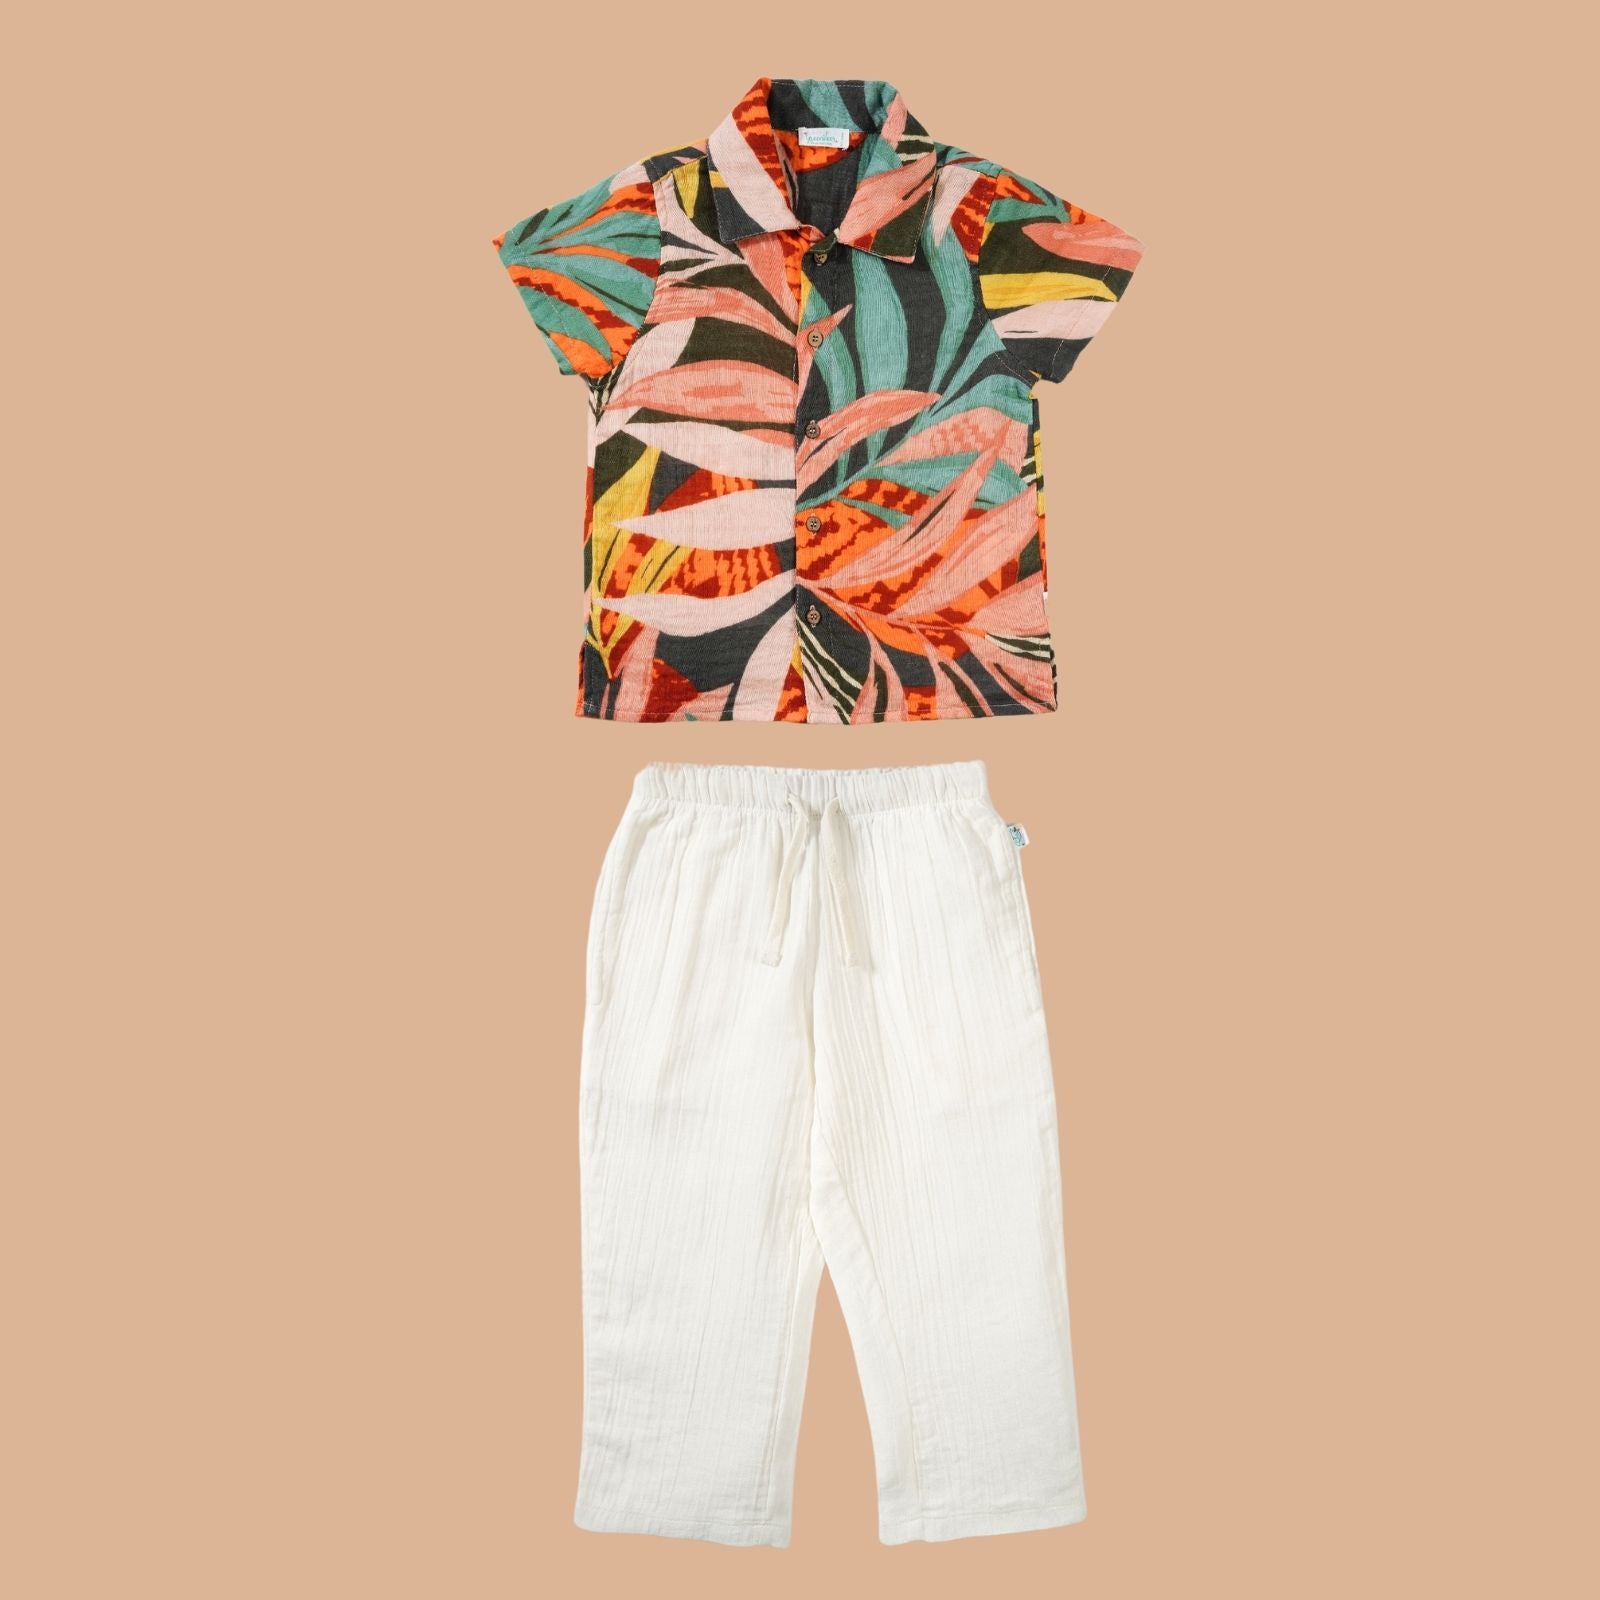 Greendeer Jungle Print Shirt with White Pants in Cotton